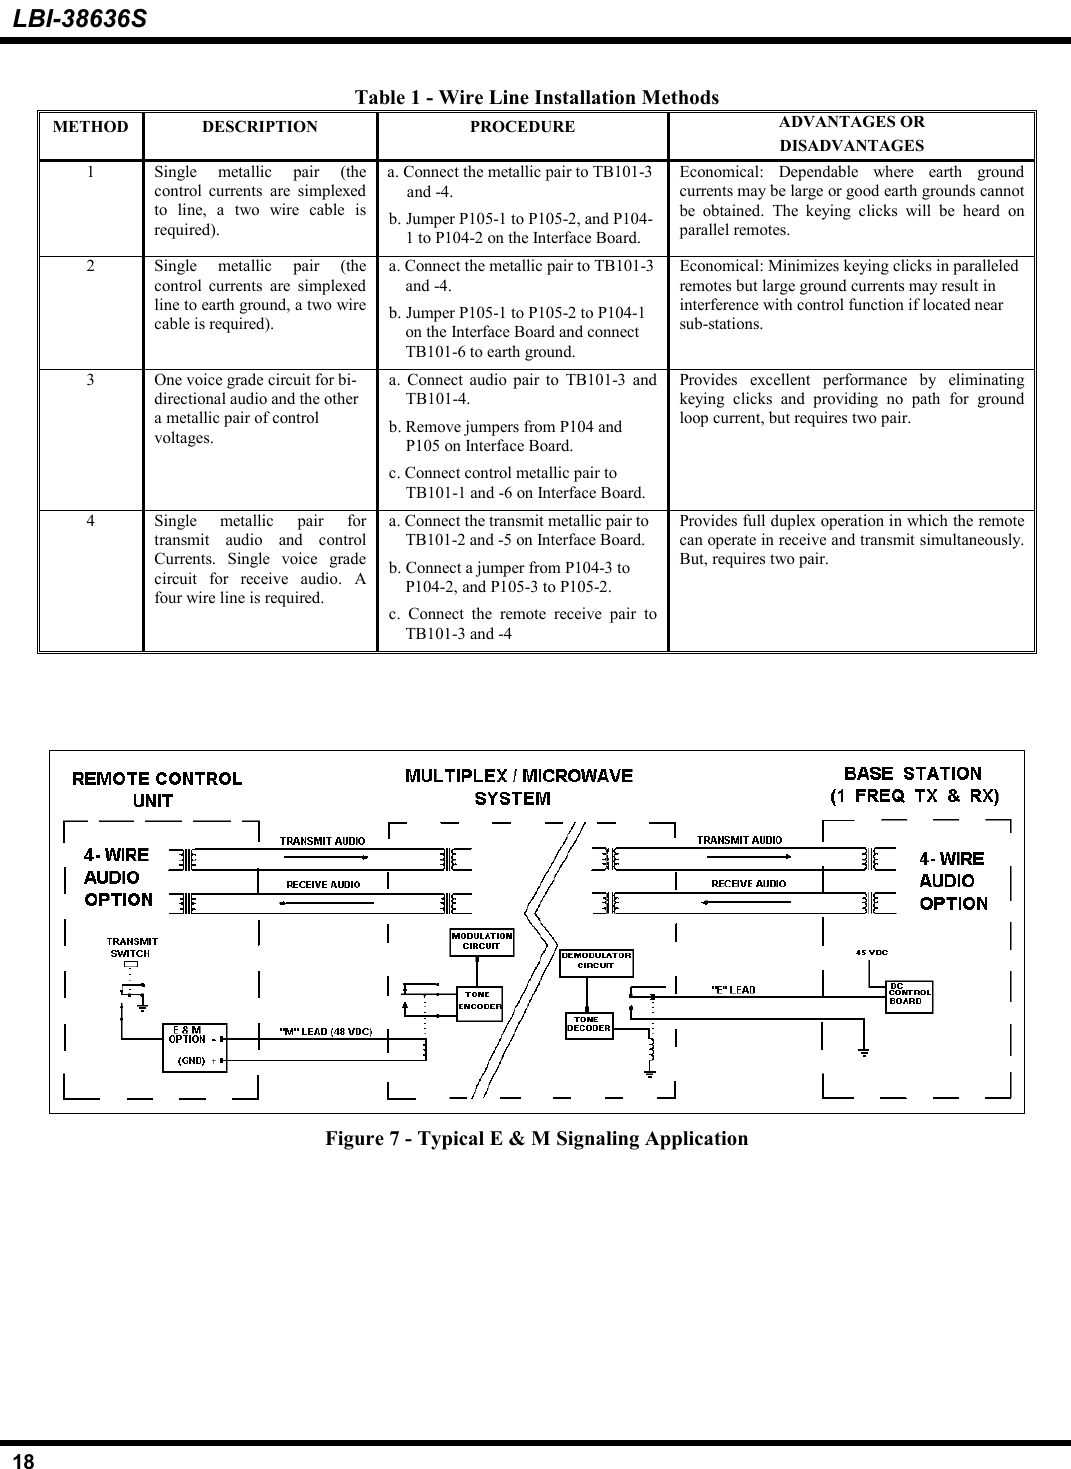 LBI-38636S18Table 1 - Wire Line Installation MethodsMETHOD DESCRIPTION PROCEDURE ADVANTAGES ORDISADVANTAGES1 Single metallic pair (thecontrol currents are simplexedto line, a two wire cable isrequired).a. Connect the metallic pair to TB101-3and -4.b. Jumper P105-1 to P105-2, and P104-1 to P104-2 on the Interface Board.Economical: Dependable where earth groundcurrents may be large or good earth grounds cannotbe obtained. The keying clicks will be heard onparallel remotes.2 Single metallic pair (thecontrol currents are simplexedline to earth ground, a two wirecable is required).a. Connect the metallic pair to TB101-3and -4.b. Jumper P105-1 to P105-2 to P104-1on the Interface Board and connectTB101-6 to earth ground.Economical: Minimizes keying clicks in paralleledremotes but large ground currents may result ininterference with control function if located nearsub-stations.3 One voice grade circuit for bi-directional audio and the othera metallic pair of controlvoltages.a. Connect audio pair to TB101-3 andTB101-4.b. Remove jumpers from P104 andP105 on Interface Board.c. Connect control metallic pair toTB101-1 and -6 on Interface Board.Provides excellent performance by eliminatingkeying clicks and providing no path for groundloop current, but requires two pair.4 Single metallic pair fortransmit audio and controlCurrents. Single voice gradecircuit for receive audio. Afour wire line is required.a. Connect the transmit metallic pair toTB101-2 and -5 on Interface Board.b. Connect a jumper from P104-3 toP104-2, and P105-3 to P105-2.c. Connect the remote receive pair toTB101-3 and -4Provides full duplex operation in which the remotecan operate in receive and transmit simultaneously.But, requires two pair.Figure 7 - Typical E &amp; M Signaling Application